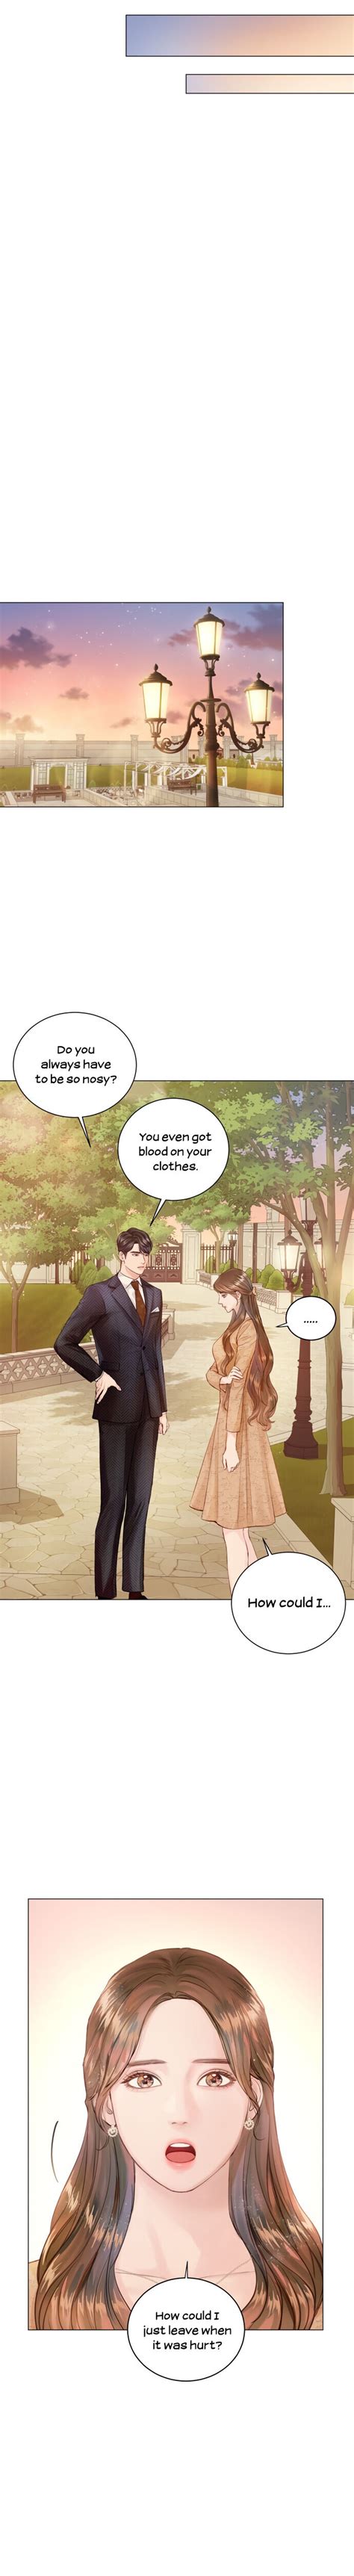 There are 3 main things that make webtoons different from traditional print and digital comics: Surely a Happy Ending - Chapter 1 - 1ST KISS MANHUA